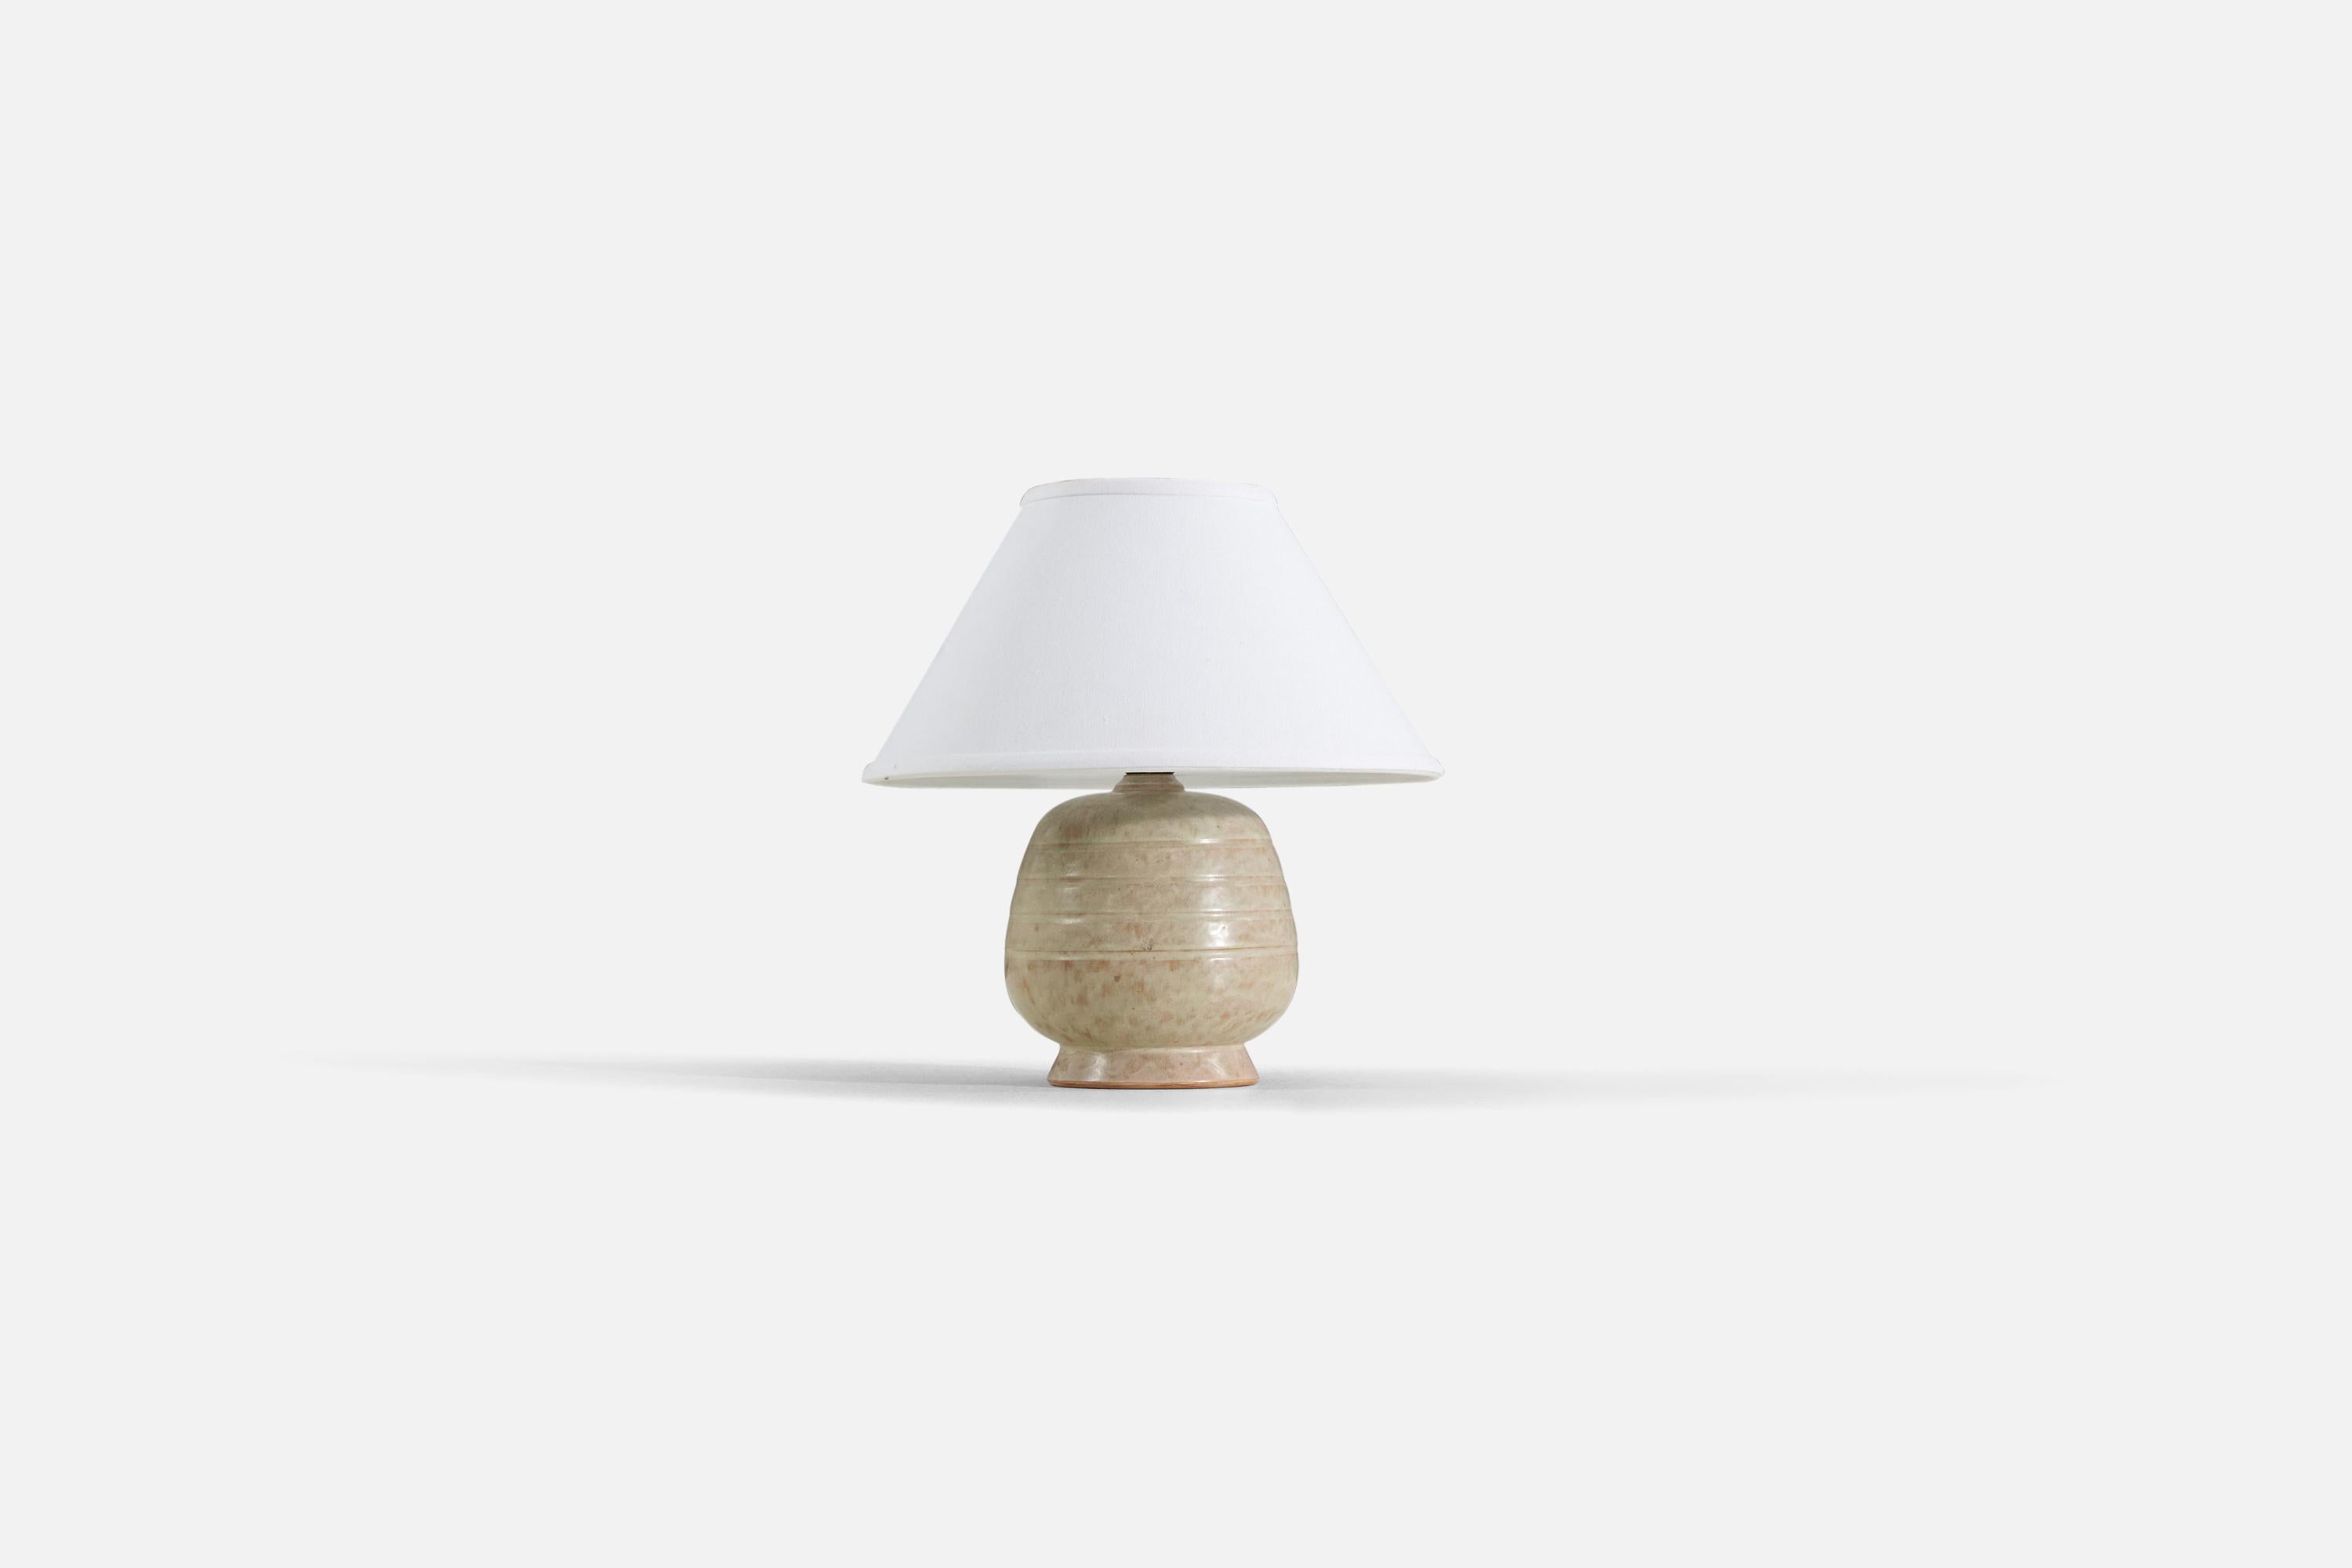 A tan / beige earthenware table lamp produced by a Swedish designer, Sweden, 1960s.

Sold without lampshade. 

Measurements listed are of lamp.
Shade : 5 x 12.25 x 7.25
Lamp with shade : 13.25 x 12.25 x 12.25.